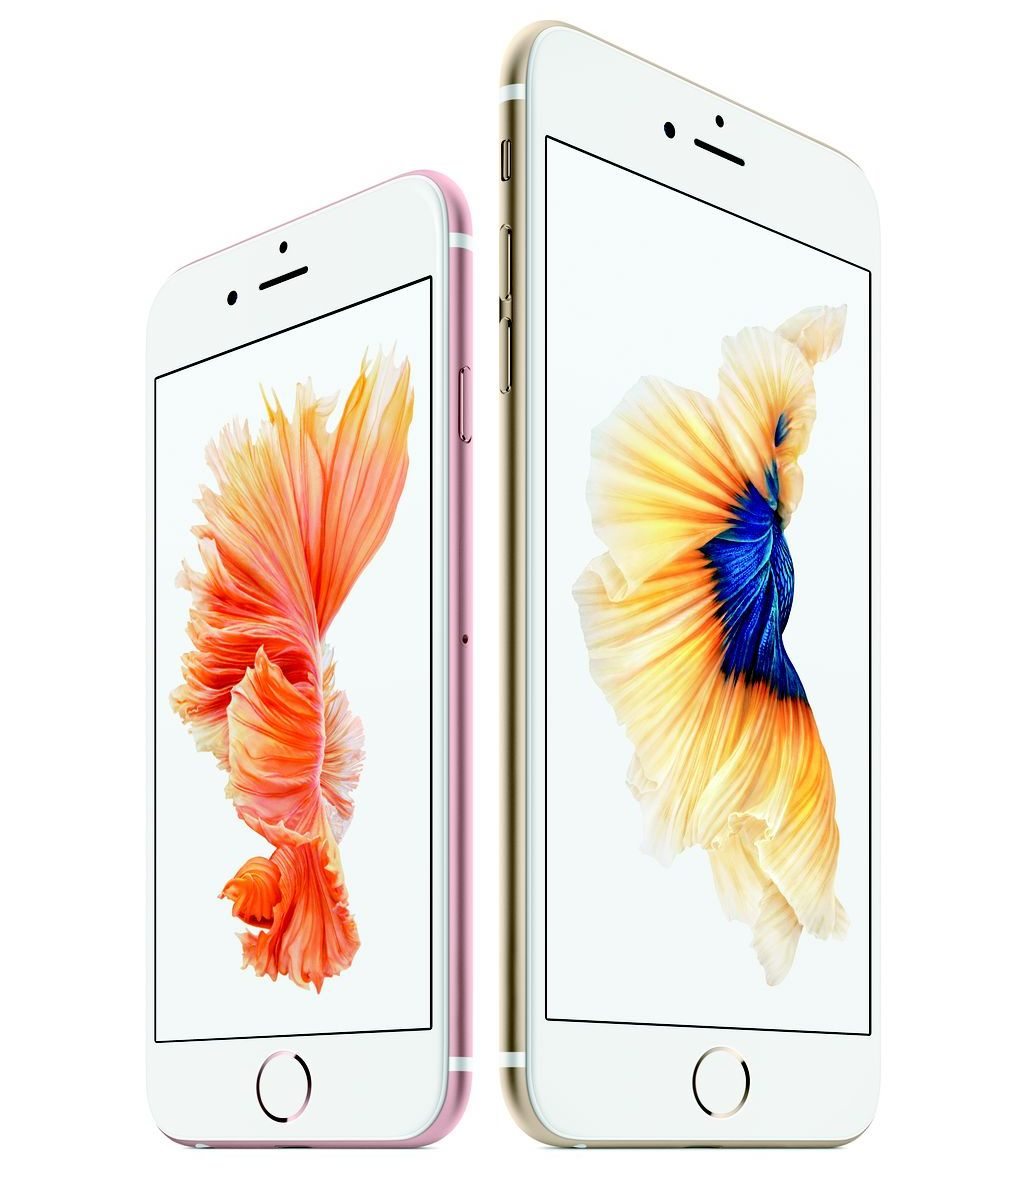 Apple iPhone 6S and 6S Plus